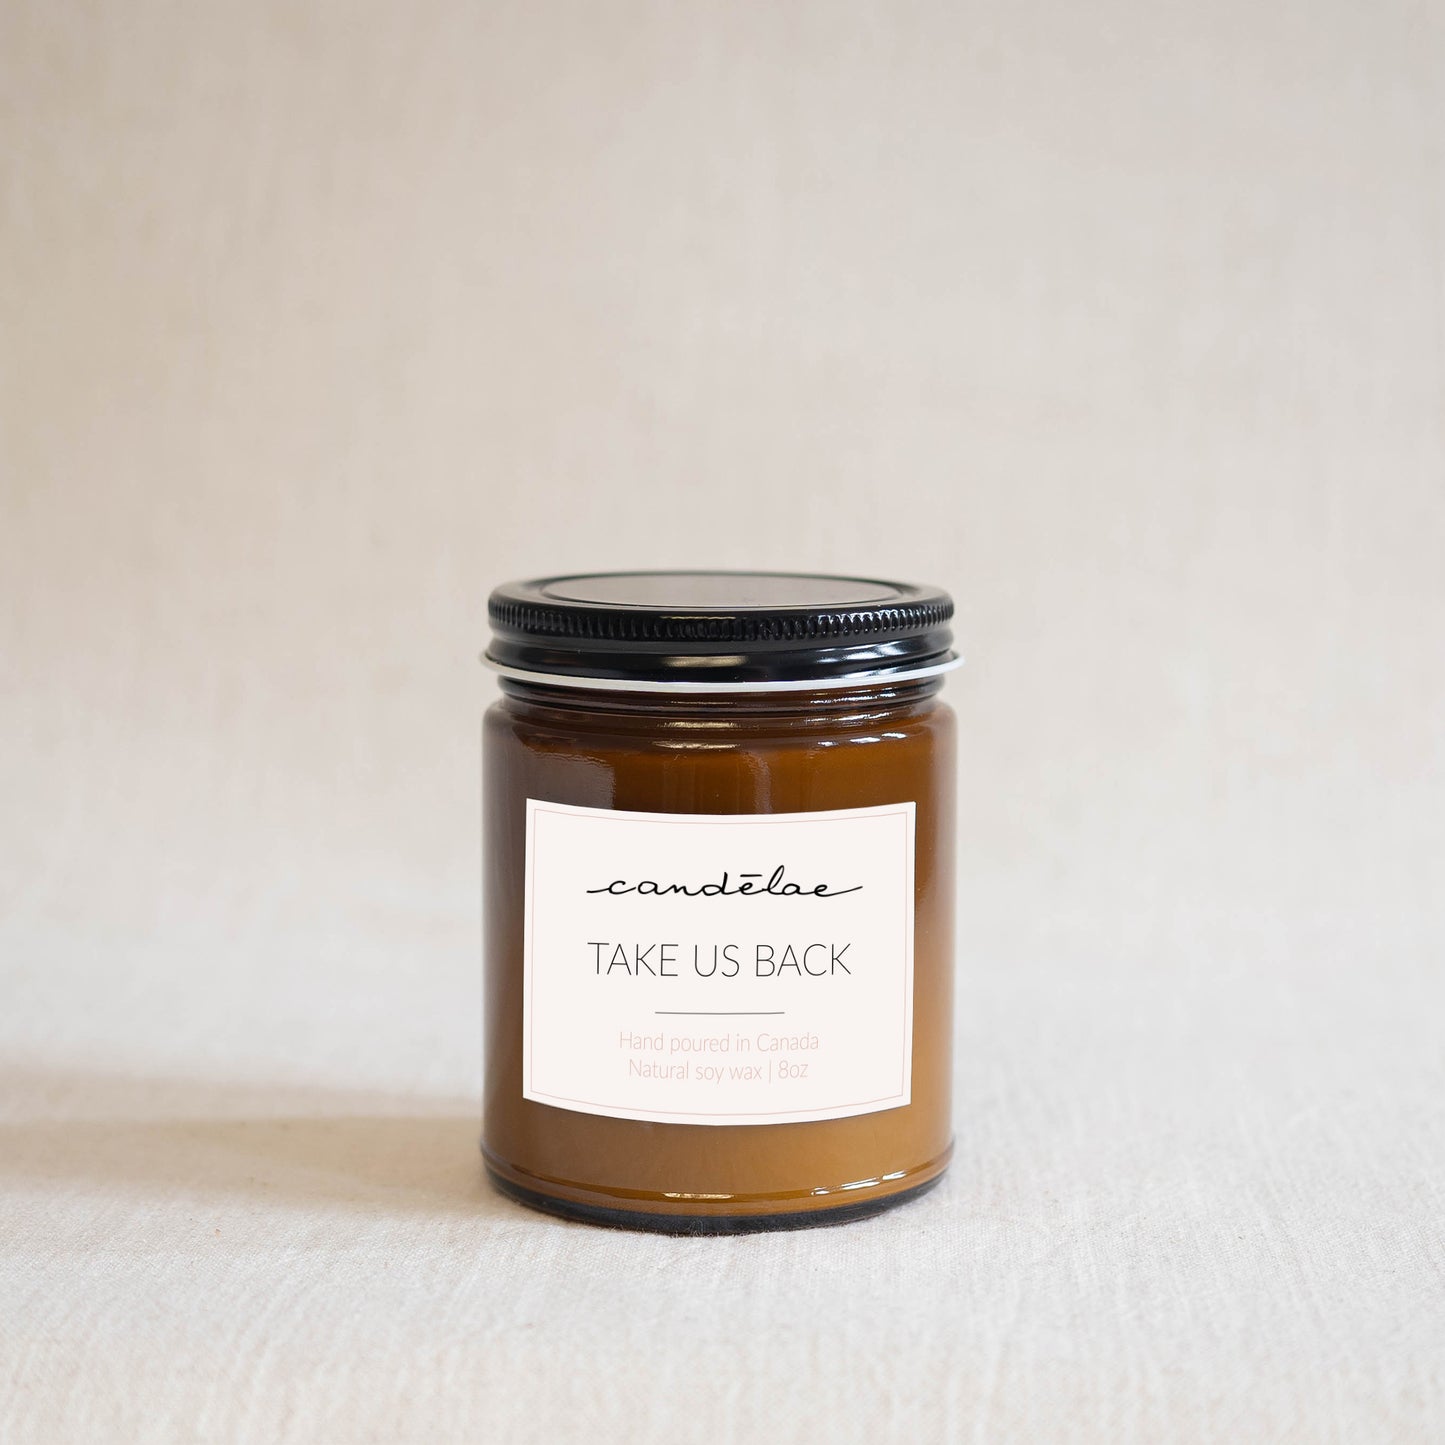 Take us back a scented candle by candēlae containing Bergamot and Frankincense is ready for photo